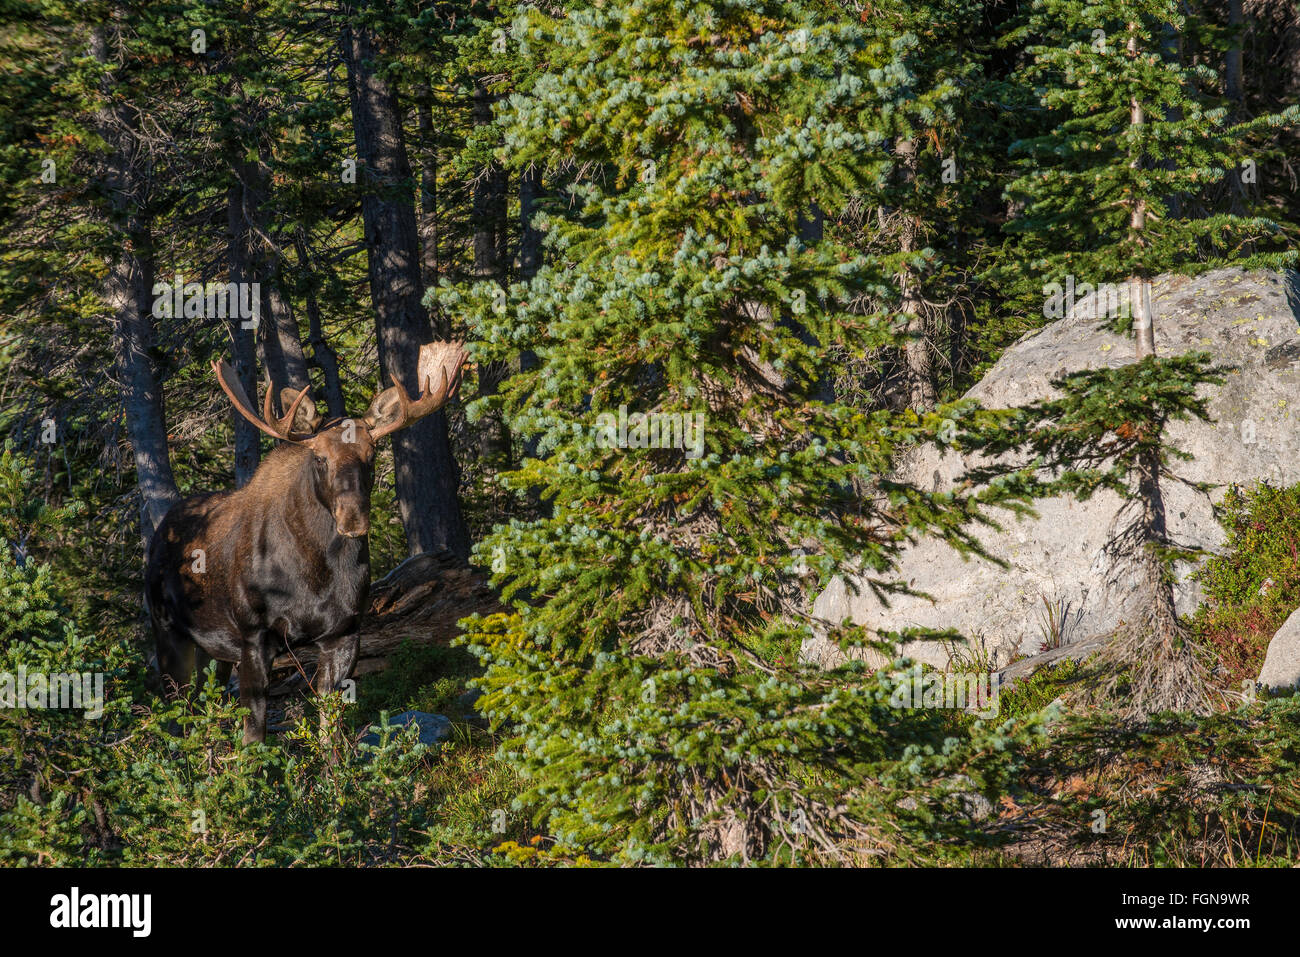 Bull Moose (Alces alces) foraging for food in forest, Indian Peaks Wilderness,Rocky mountains, Colorado, USA Stock Photo